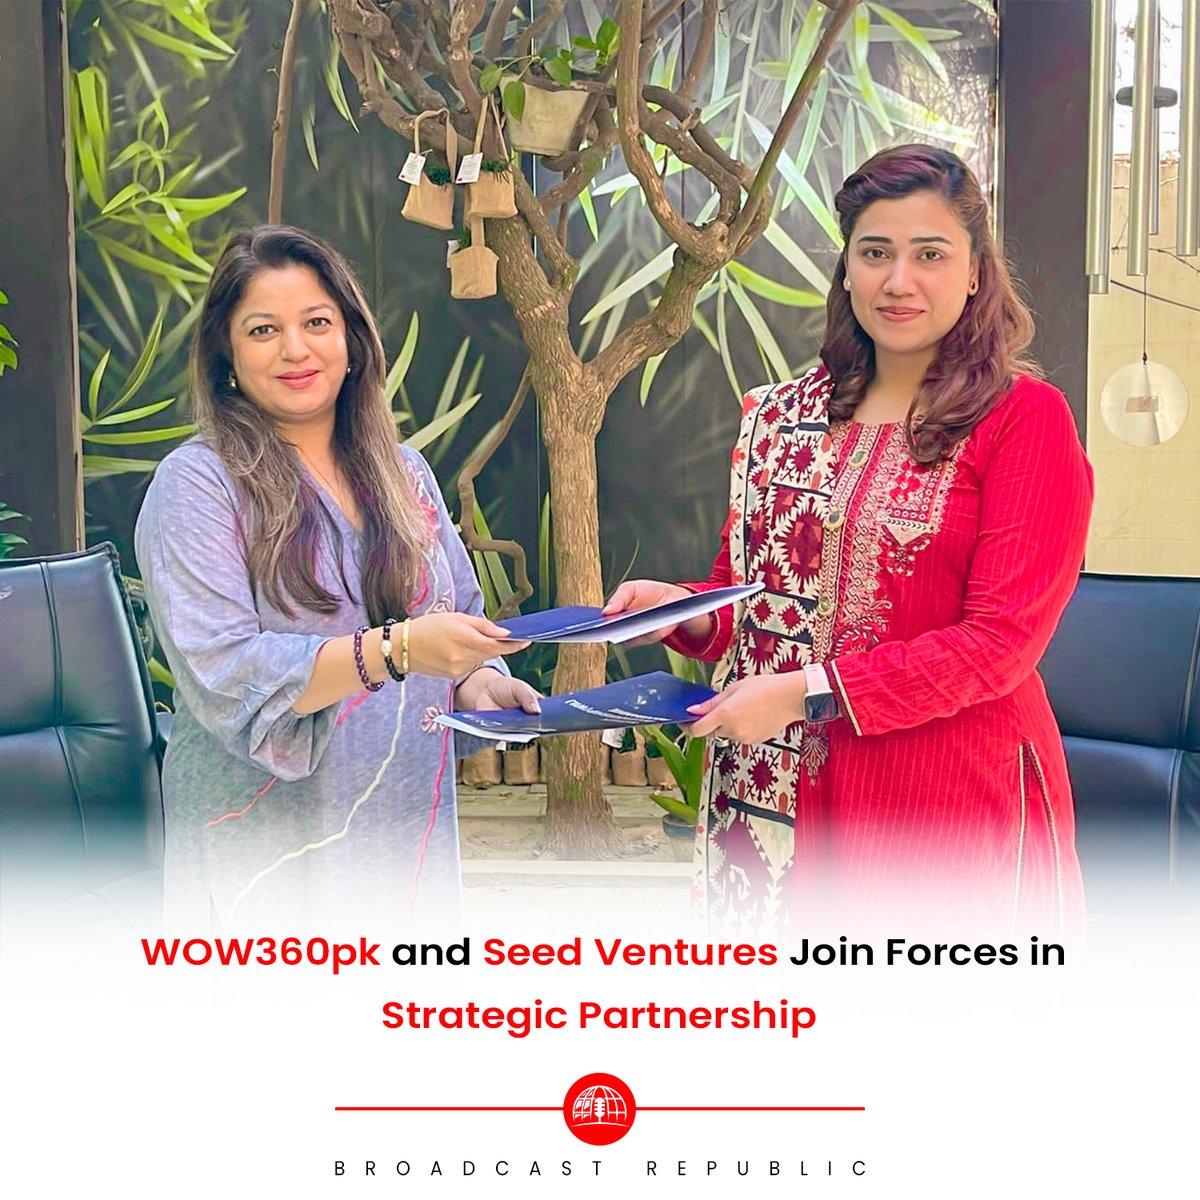 WOW360.pk has partnered with SEED Ventures for the British Council's Women in Leadership Program. 

#BroadcastRepublic #Wow360 #WomeninLeadership #Empowerment #Diversity #Impact #SeedVentures #BritishCouncil 
🌐 Read More: Broadcastrepublic.com